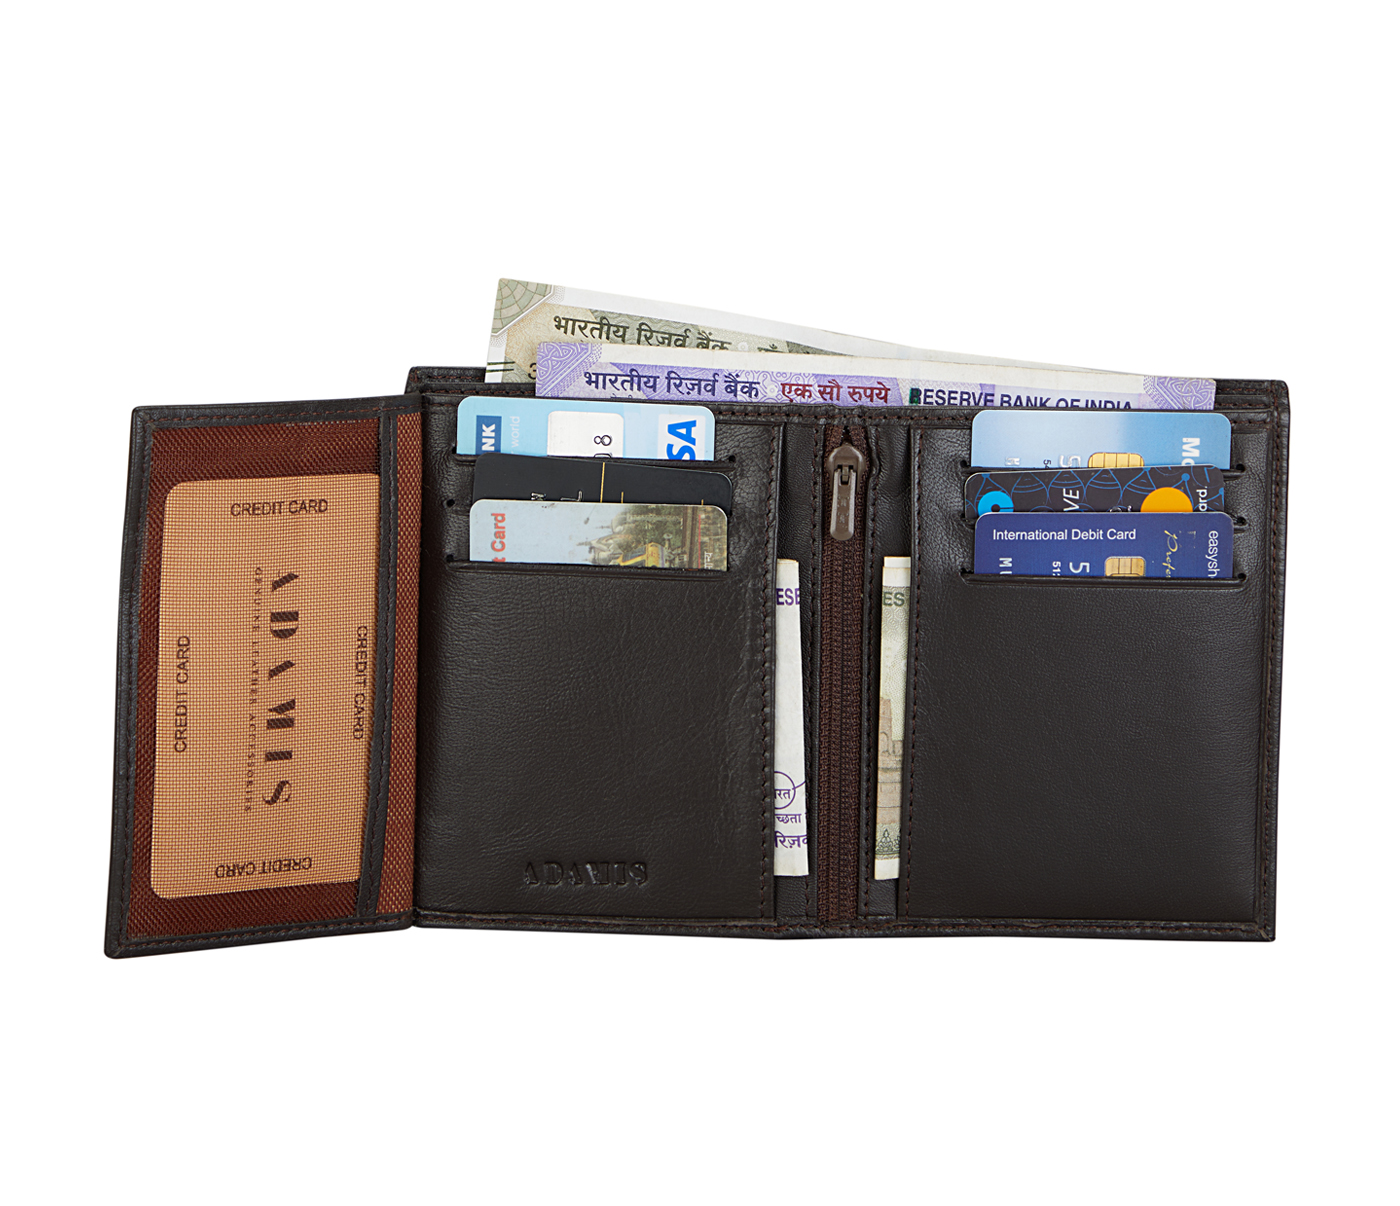 W7-Davide-Men's Bifold Wallet With Photo Id In Genuine Leather - Brown